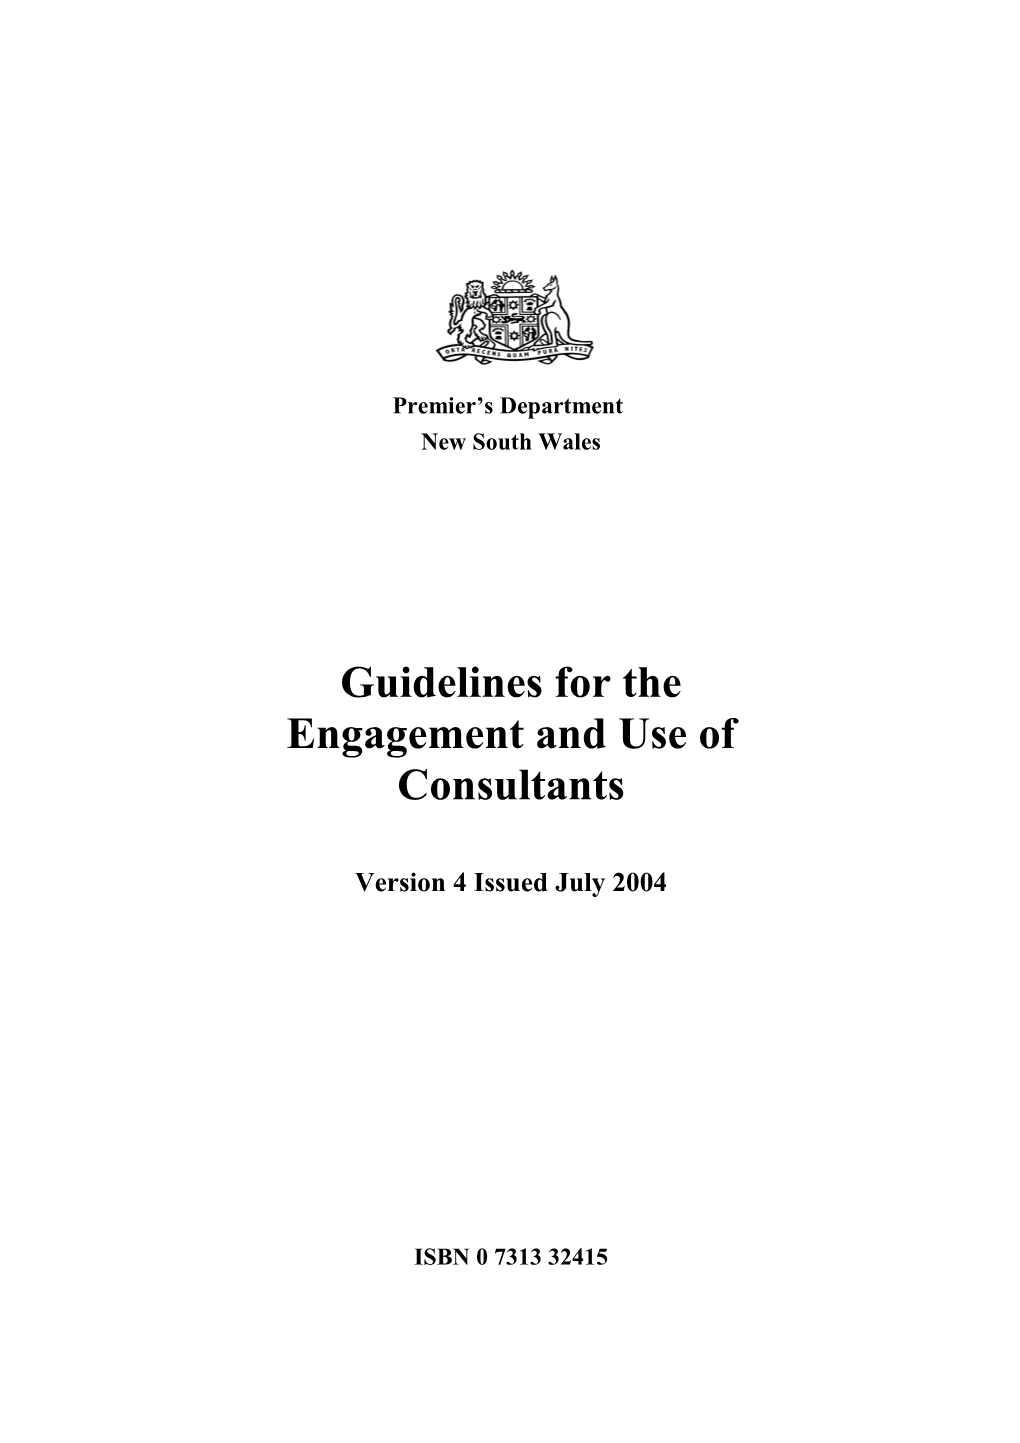 Guidelines for the Engagement and Use of Consultants